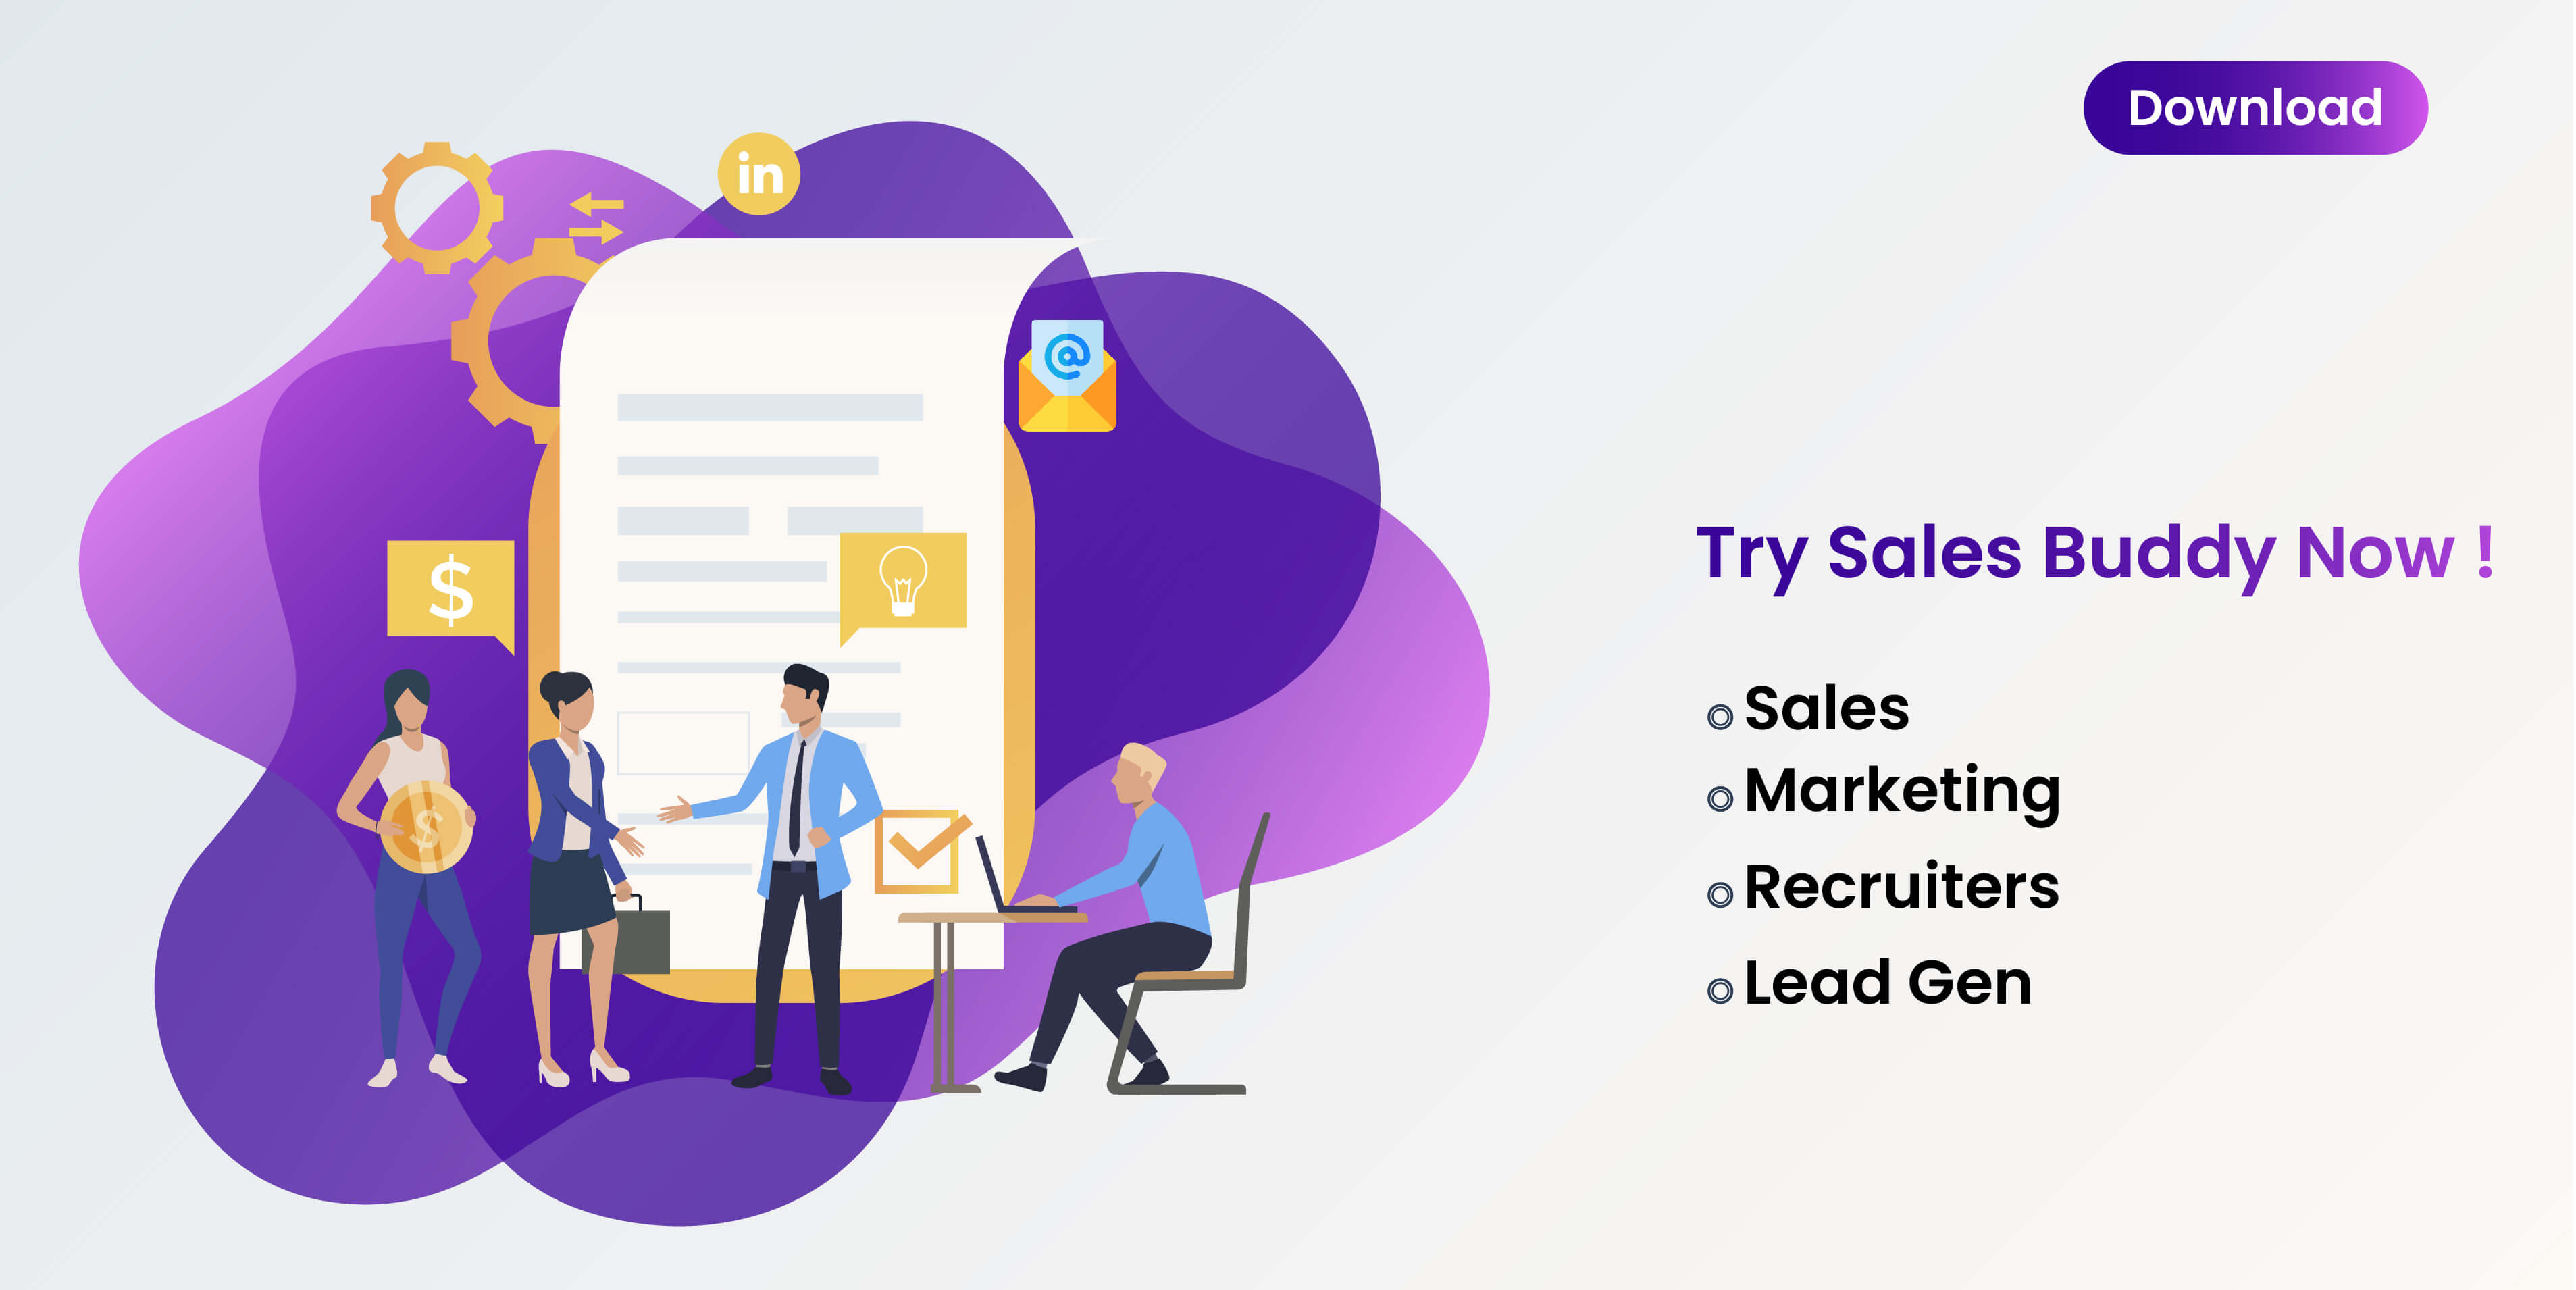 Download Salesbuddy for free